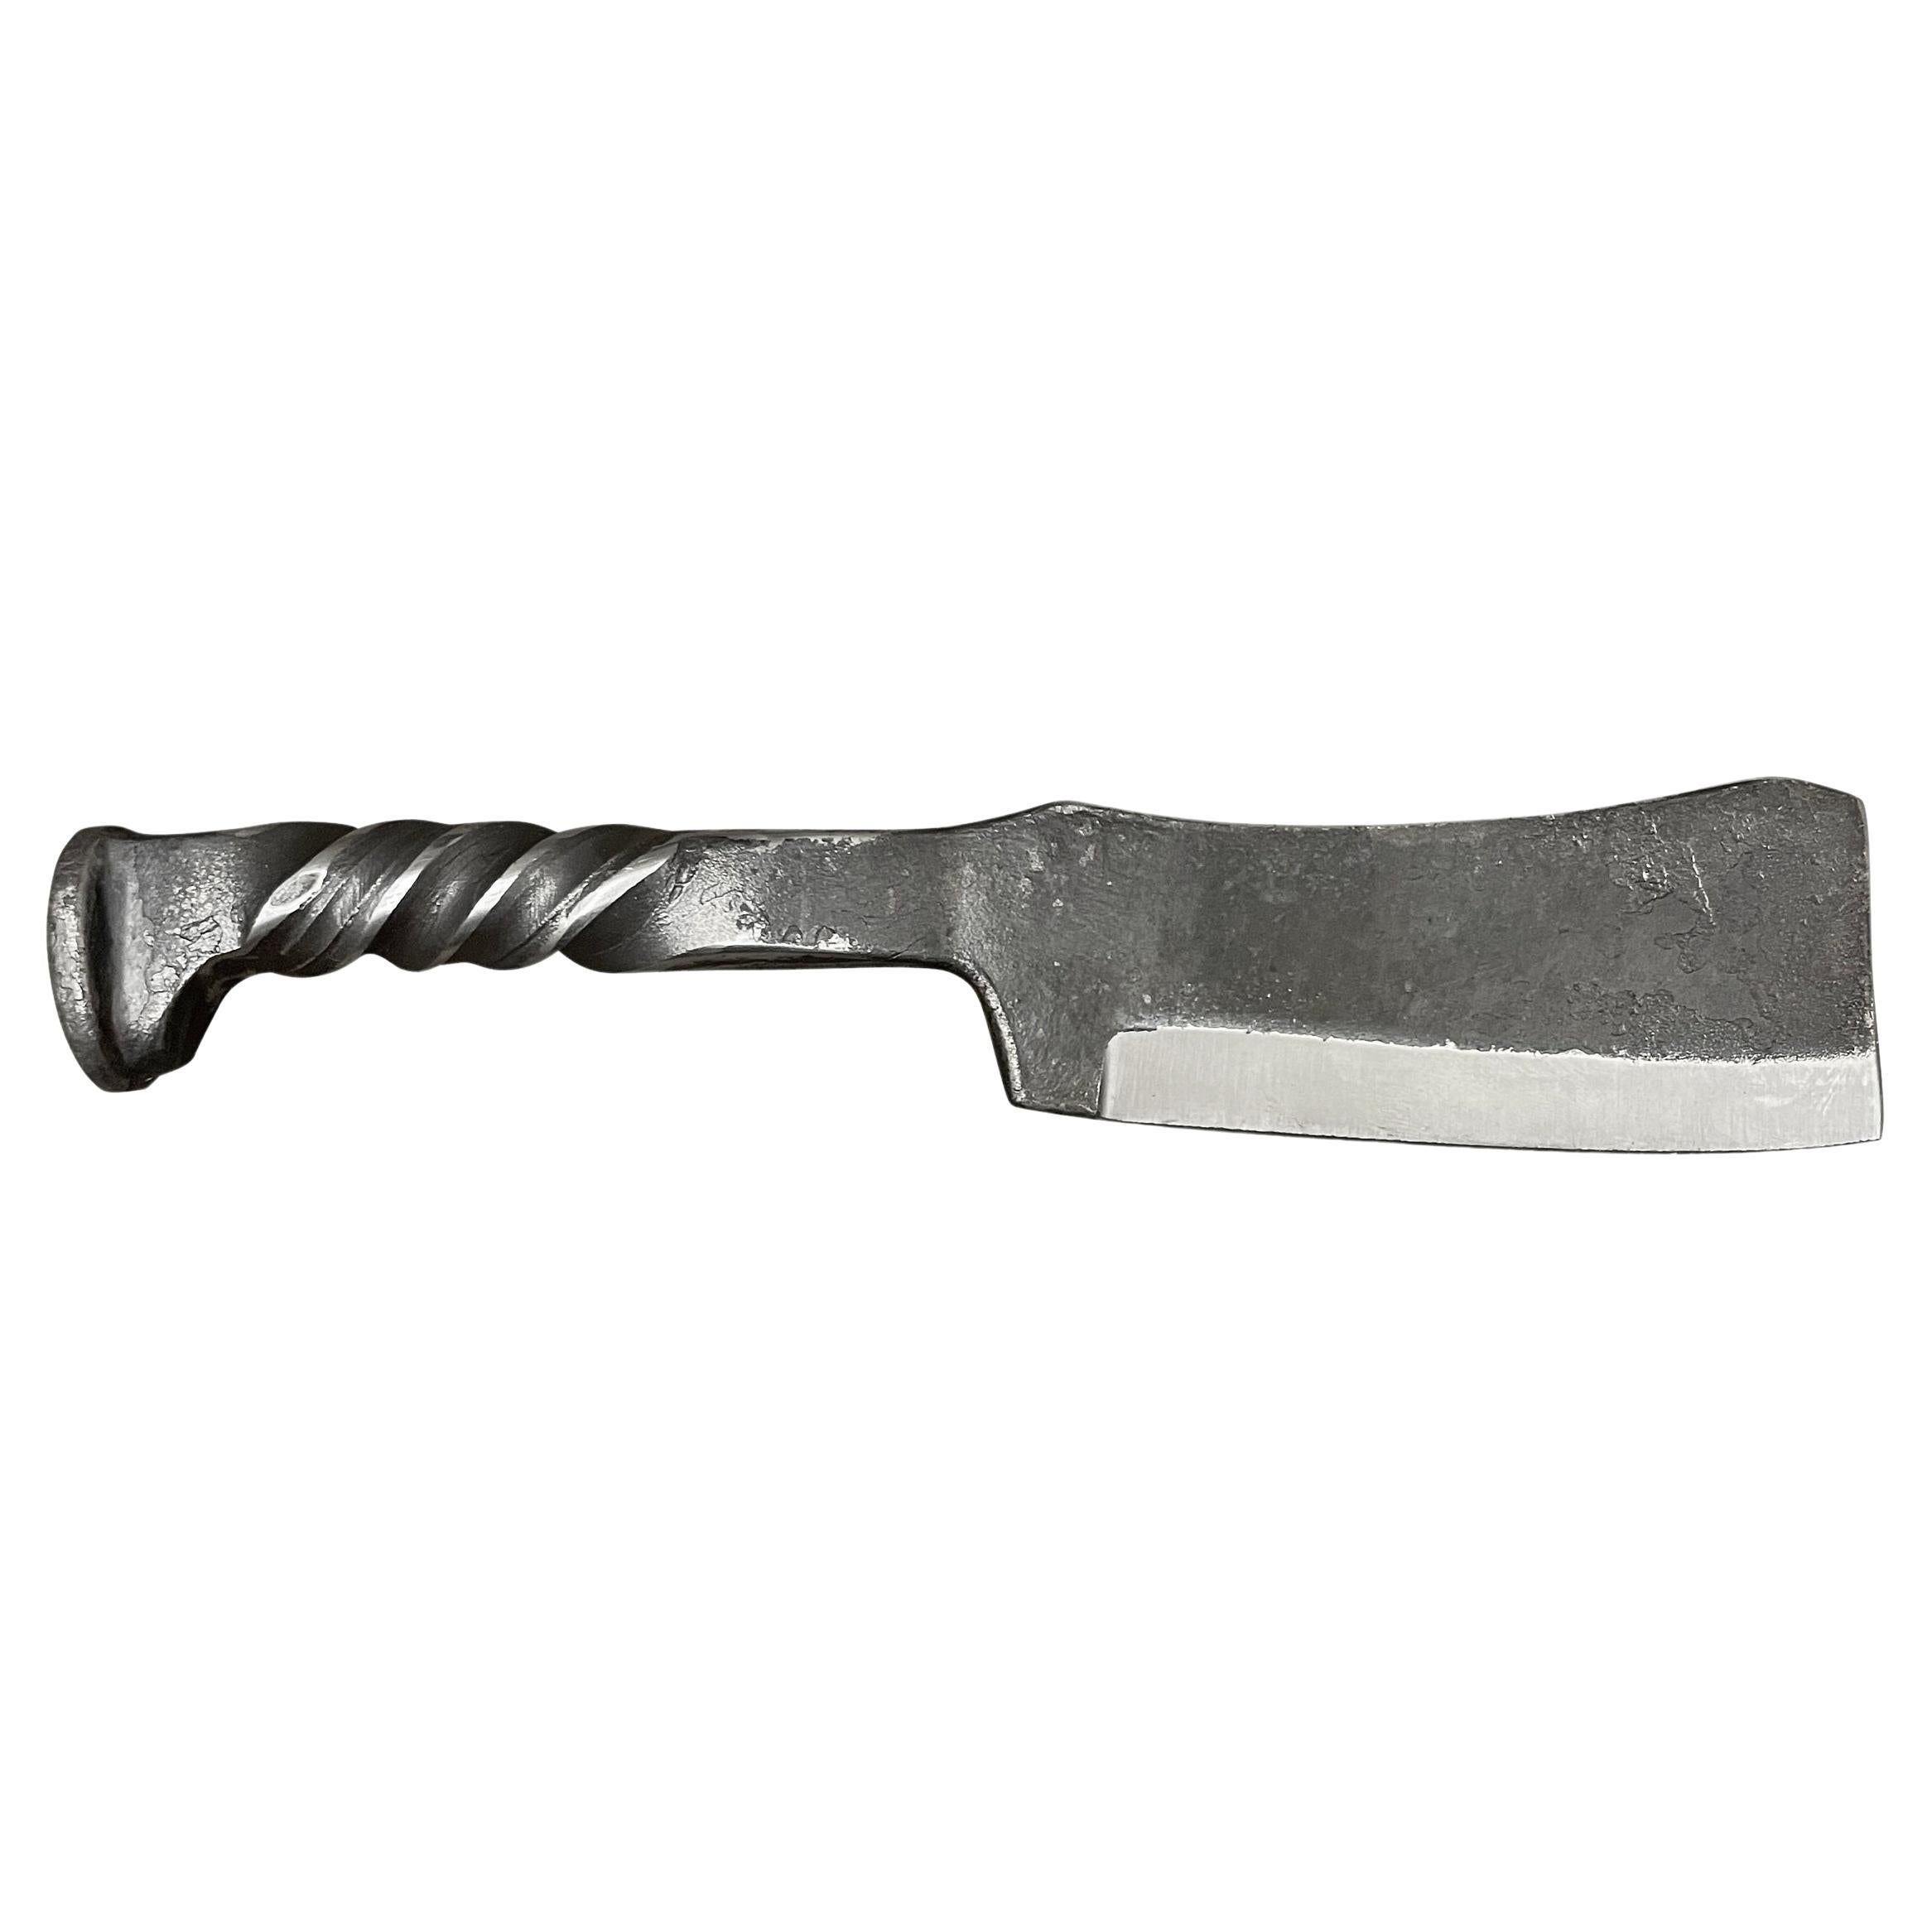 Wrought Iron Butcher's Knife For Sale